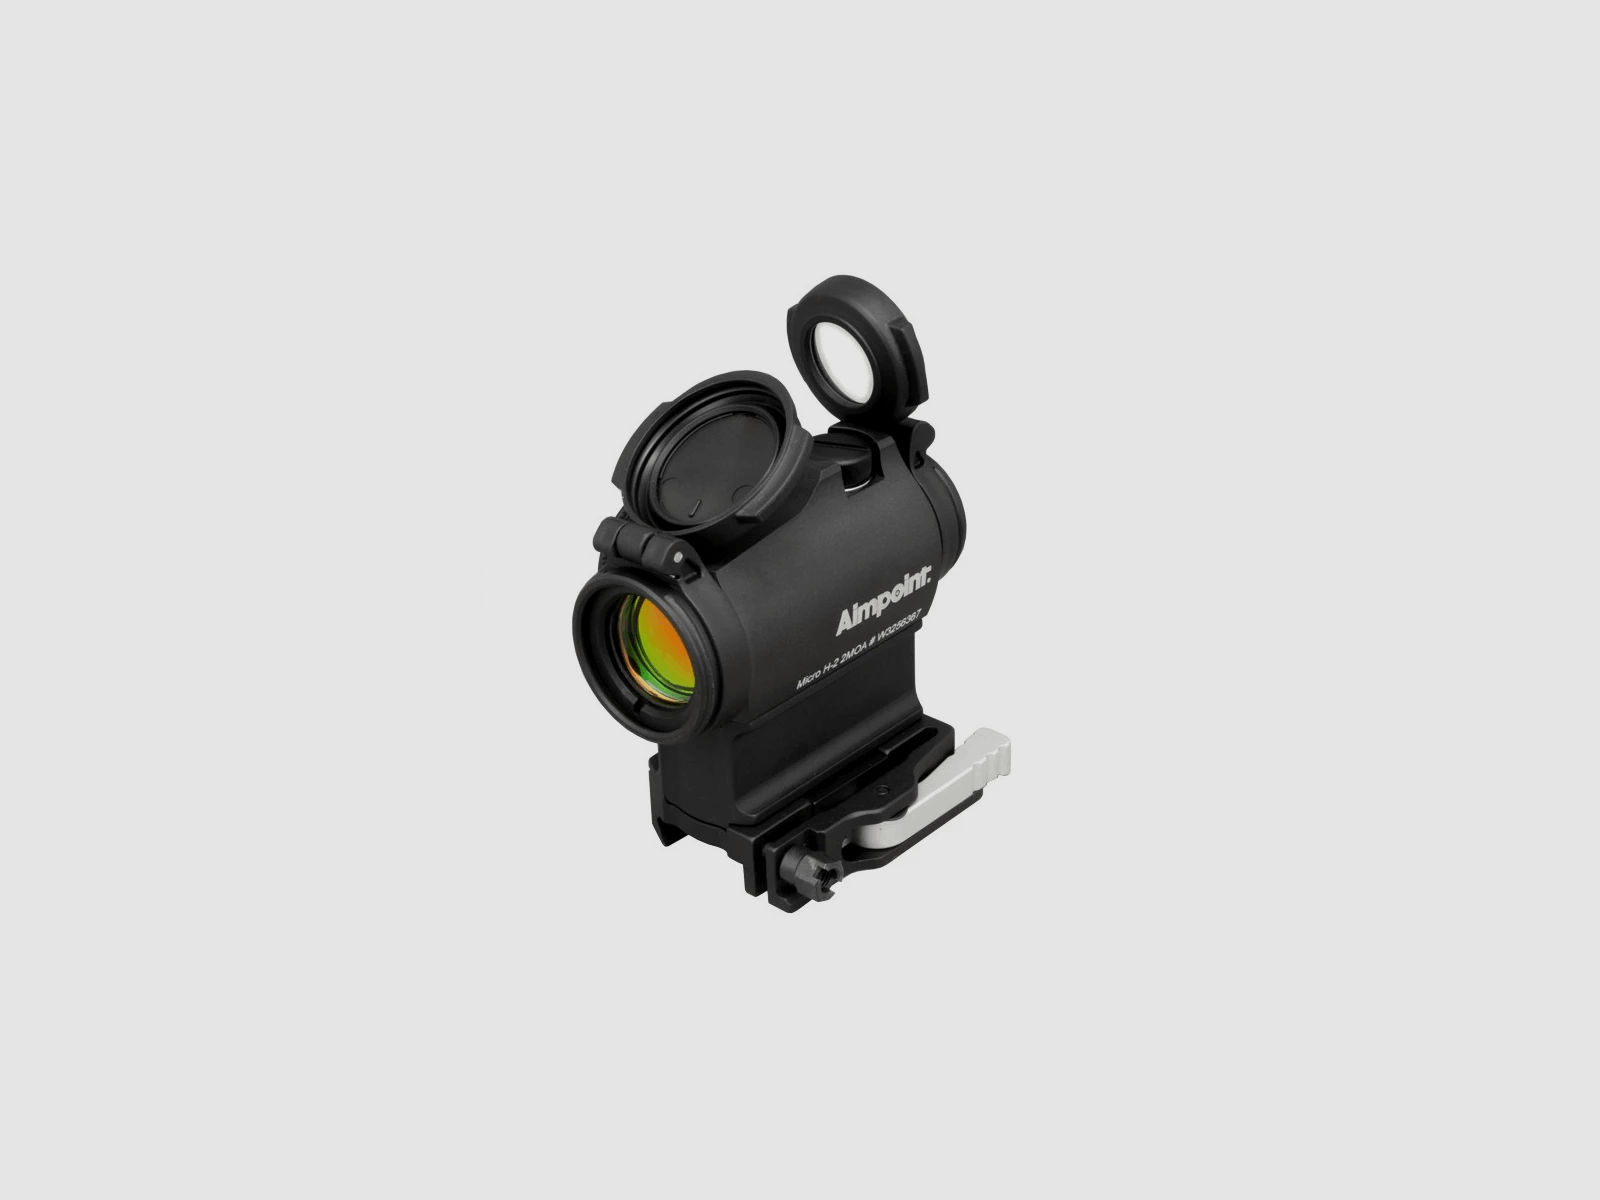 AIMPOINT MICRO H-2 2 MOA schwarz inkl. Adapter 39mm für Weaver / Picatinny